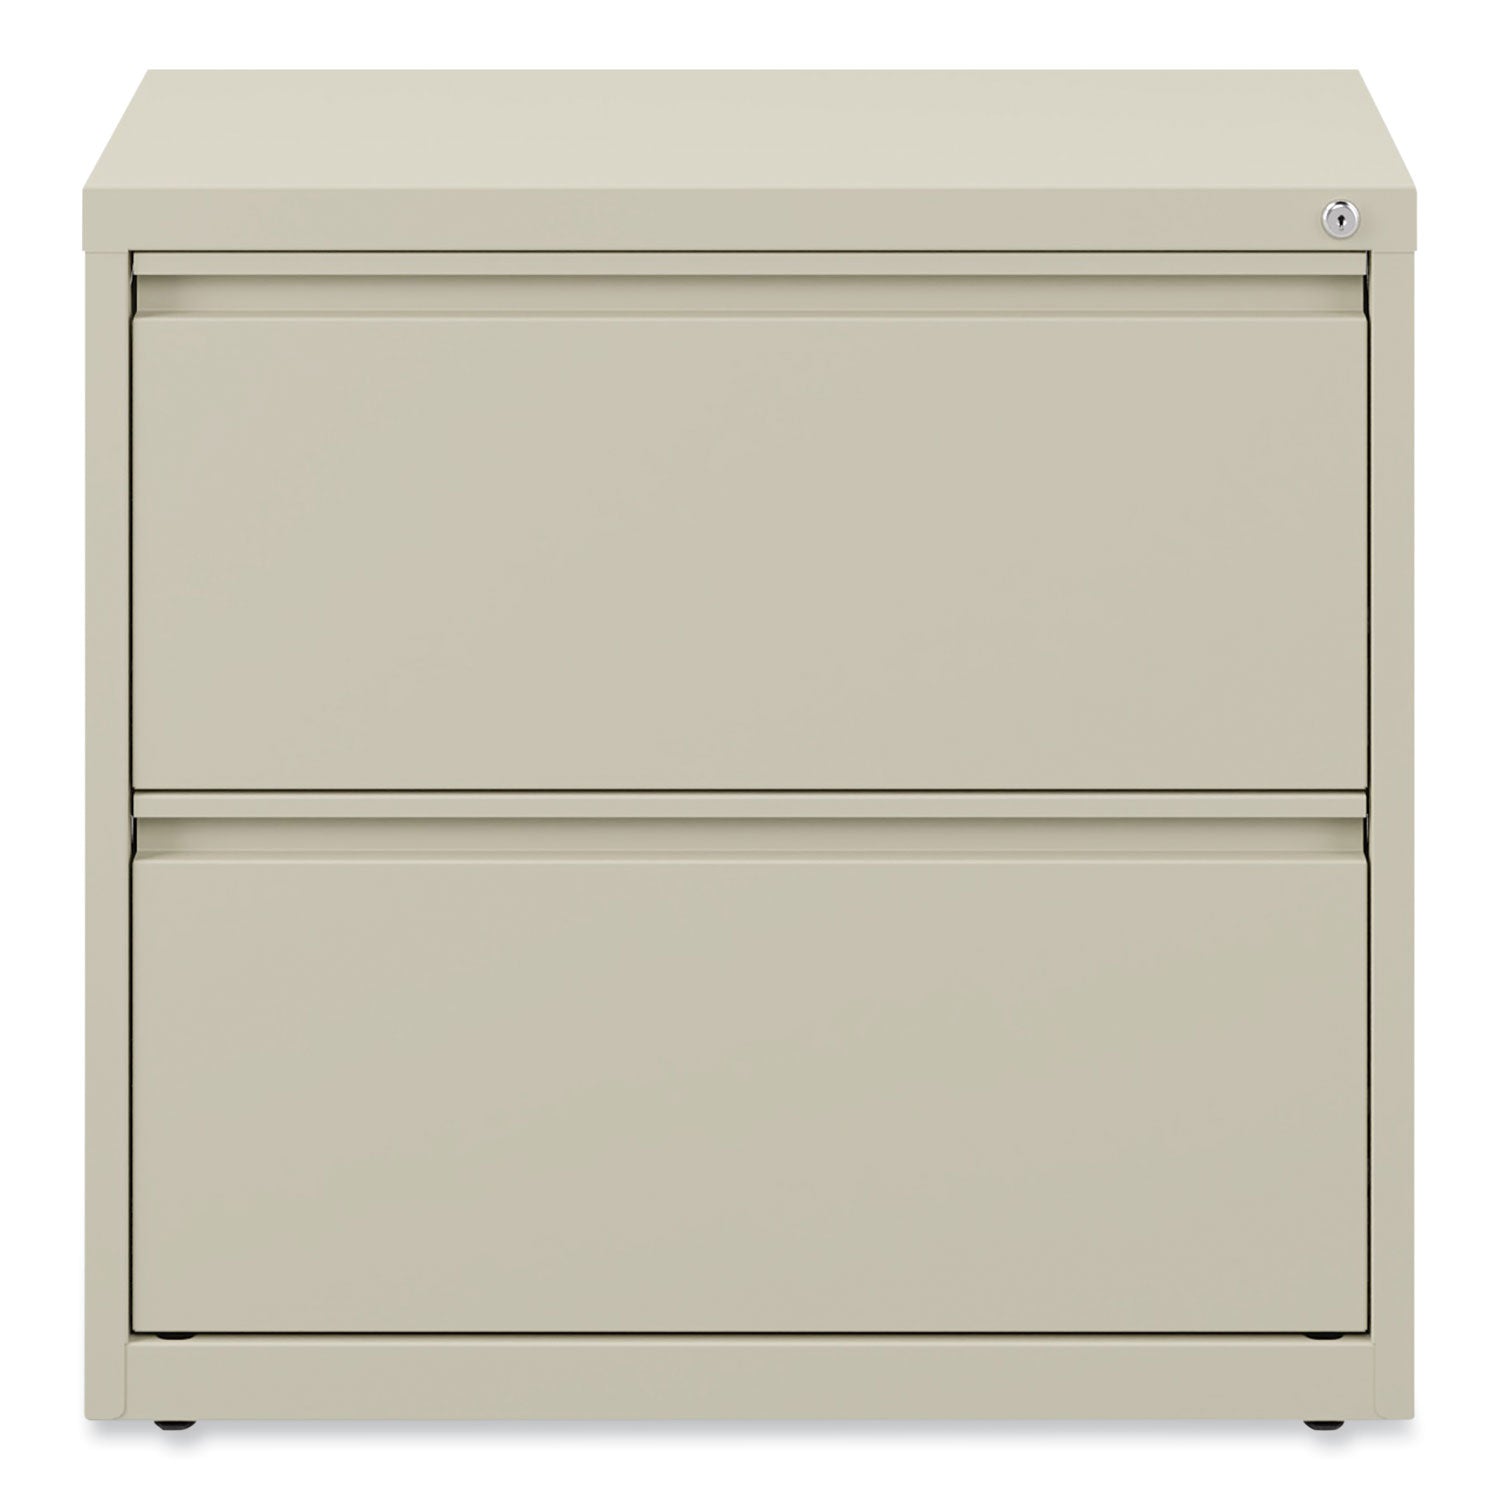 lateral-file-2-legal-letter-size-file-drawers-putty-30-x-1863-x-28_alehlf3029py - 1